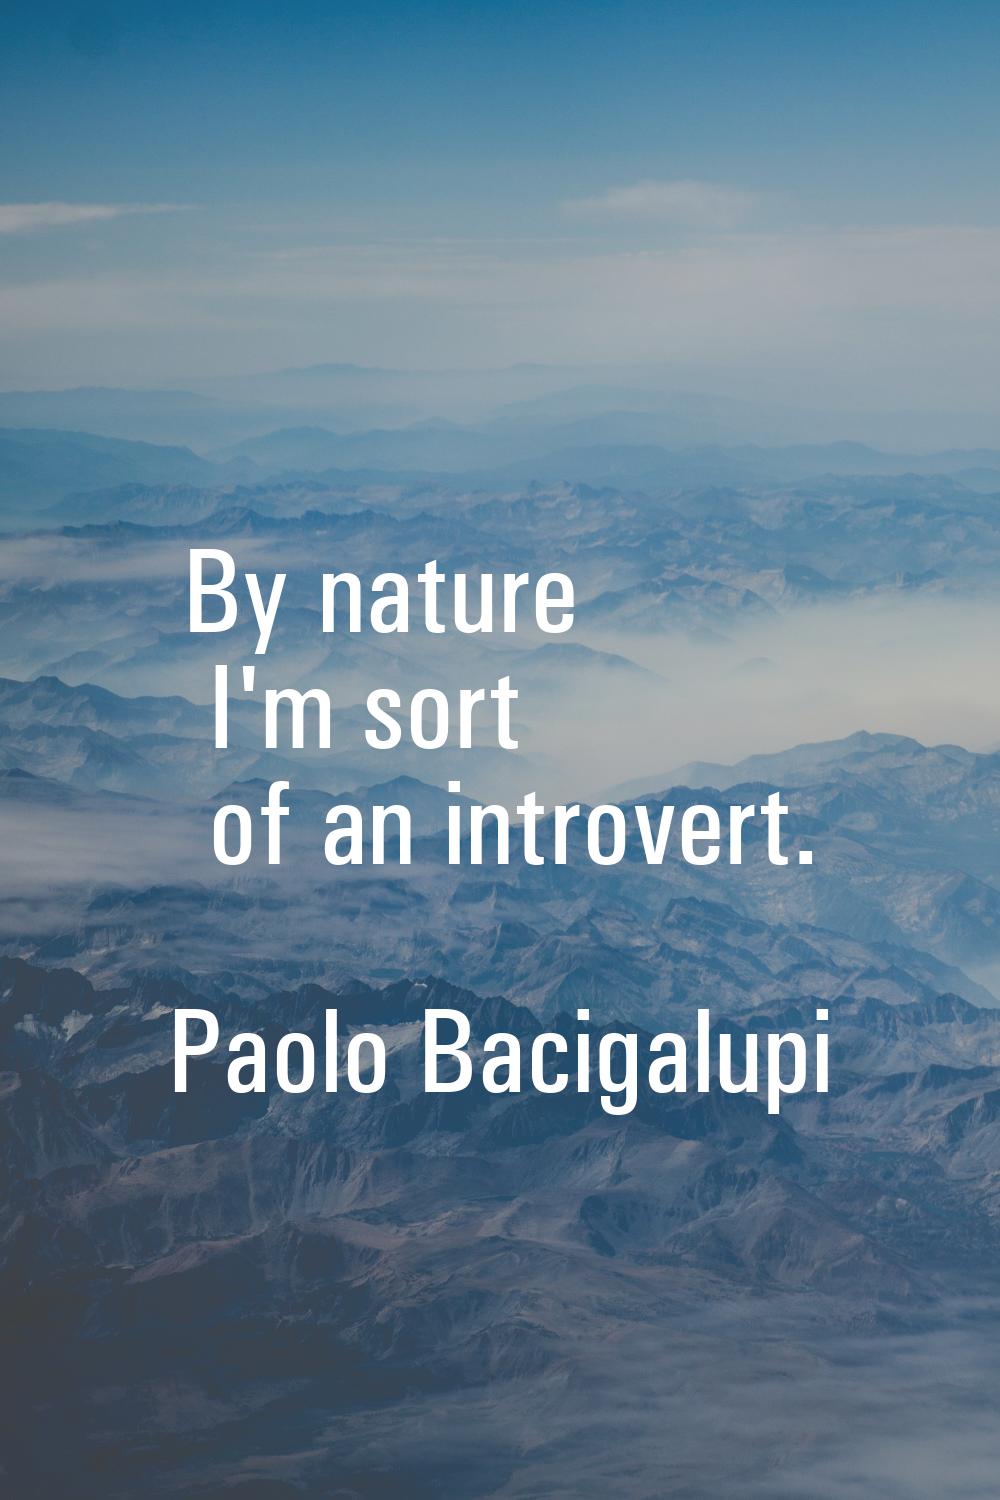 By nature I'm sort of an introvert.